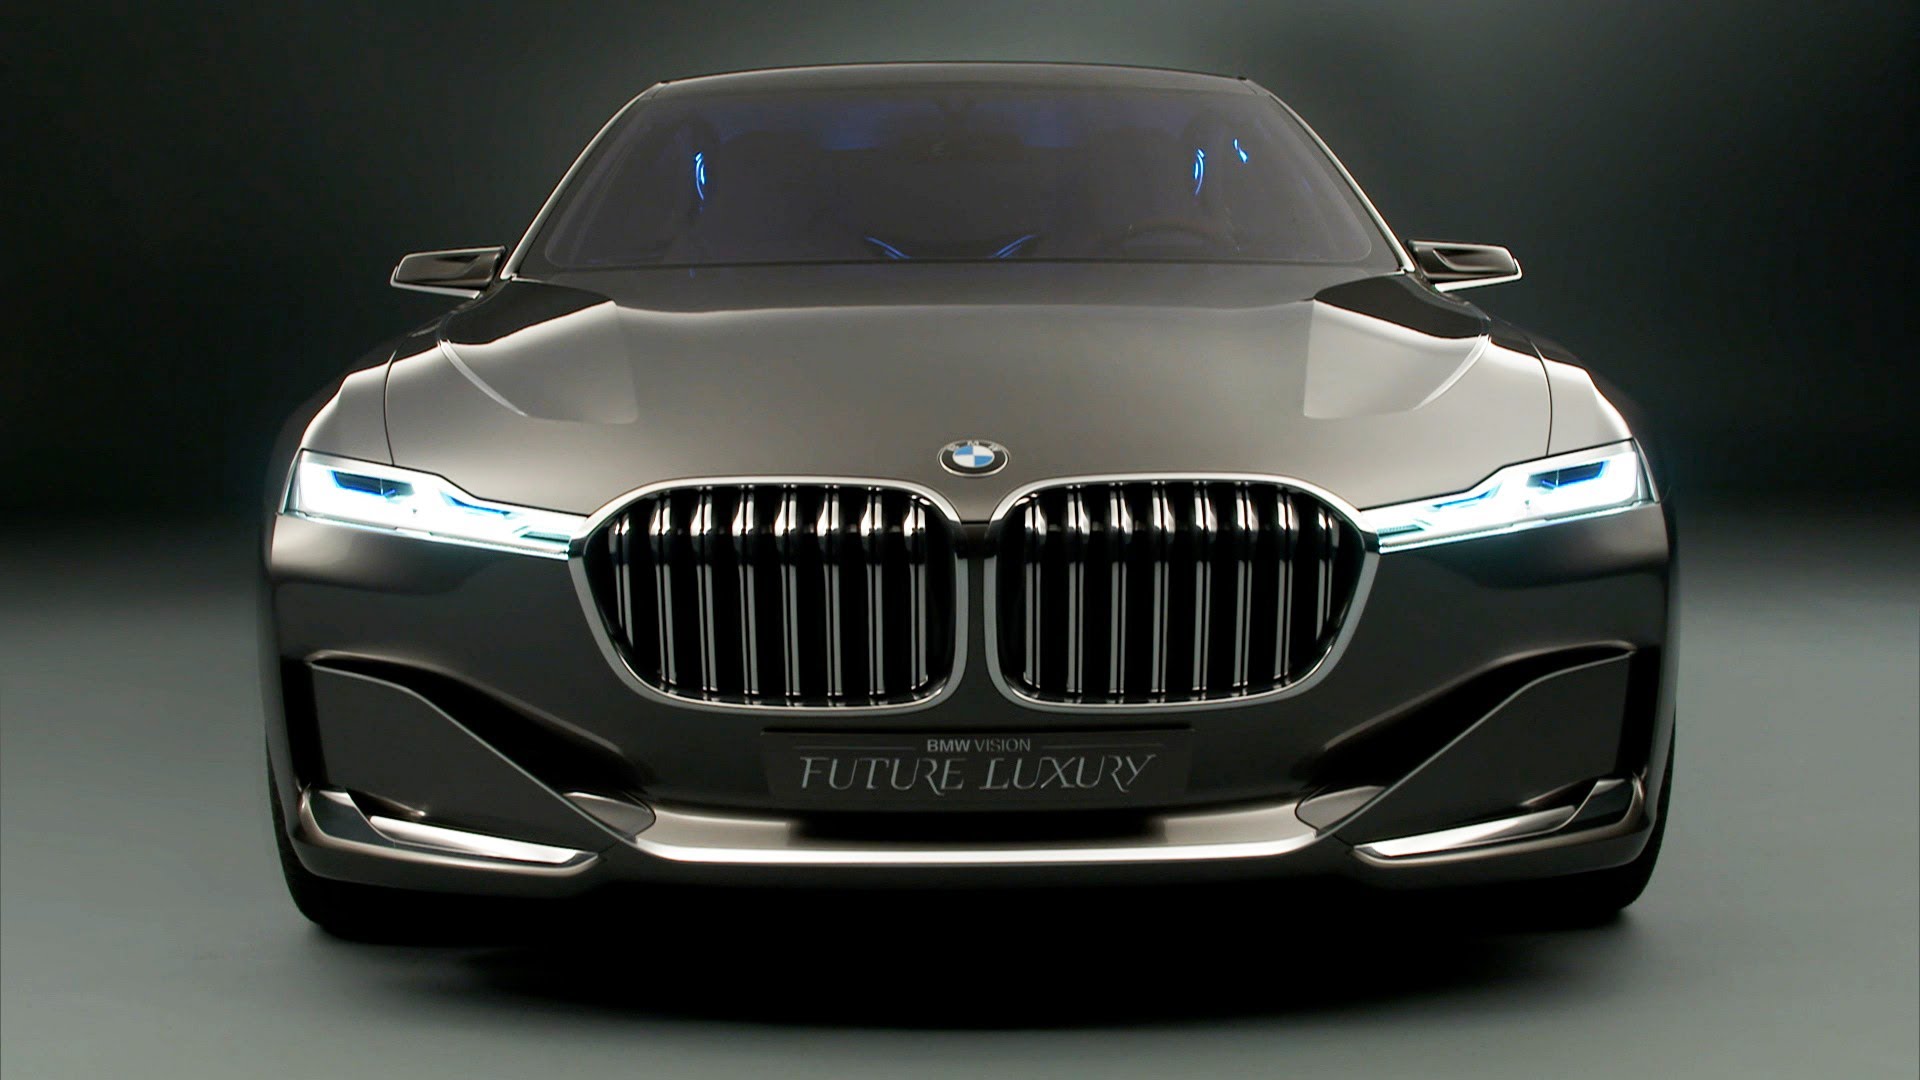 High Resolution Wallpaper | 2014 Bmw Vision Future Luxury Concept 1920x1080 px